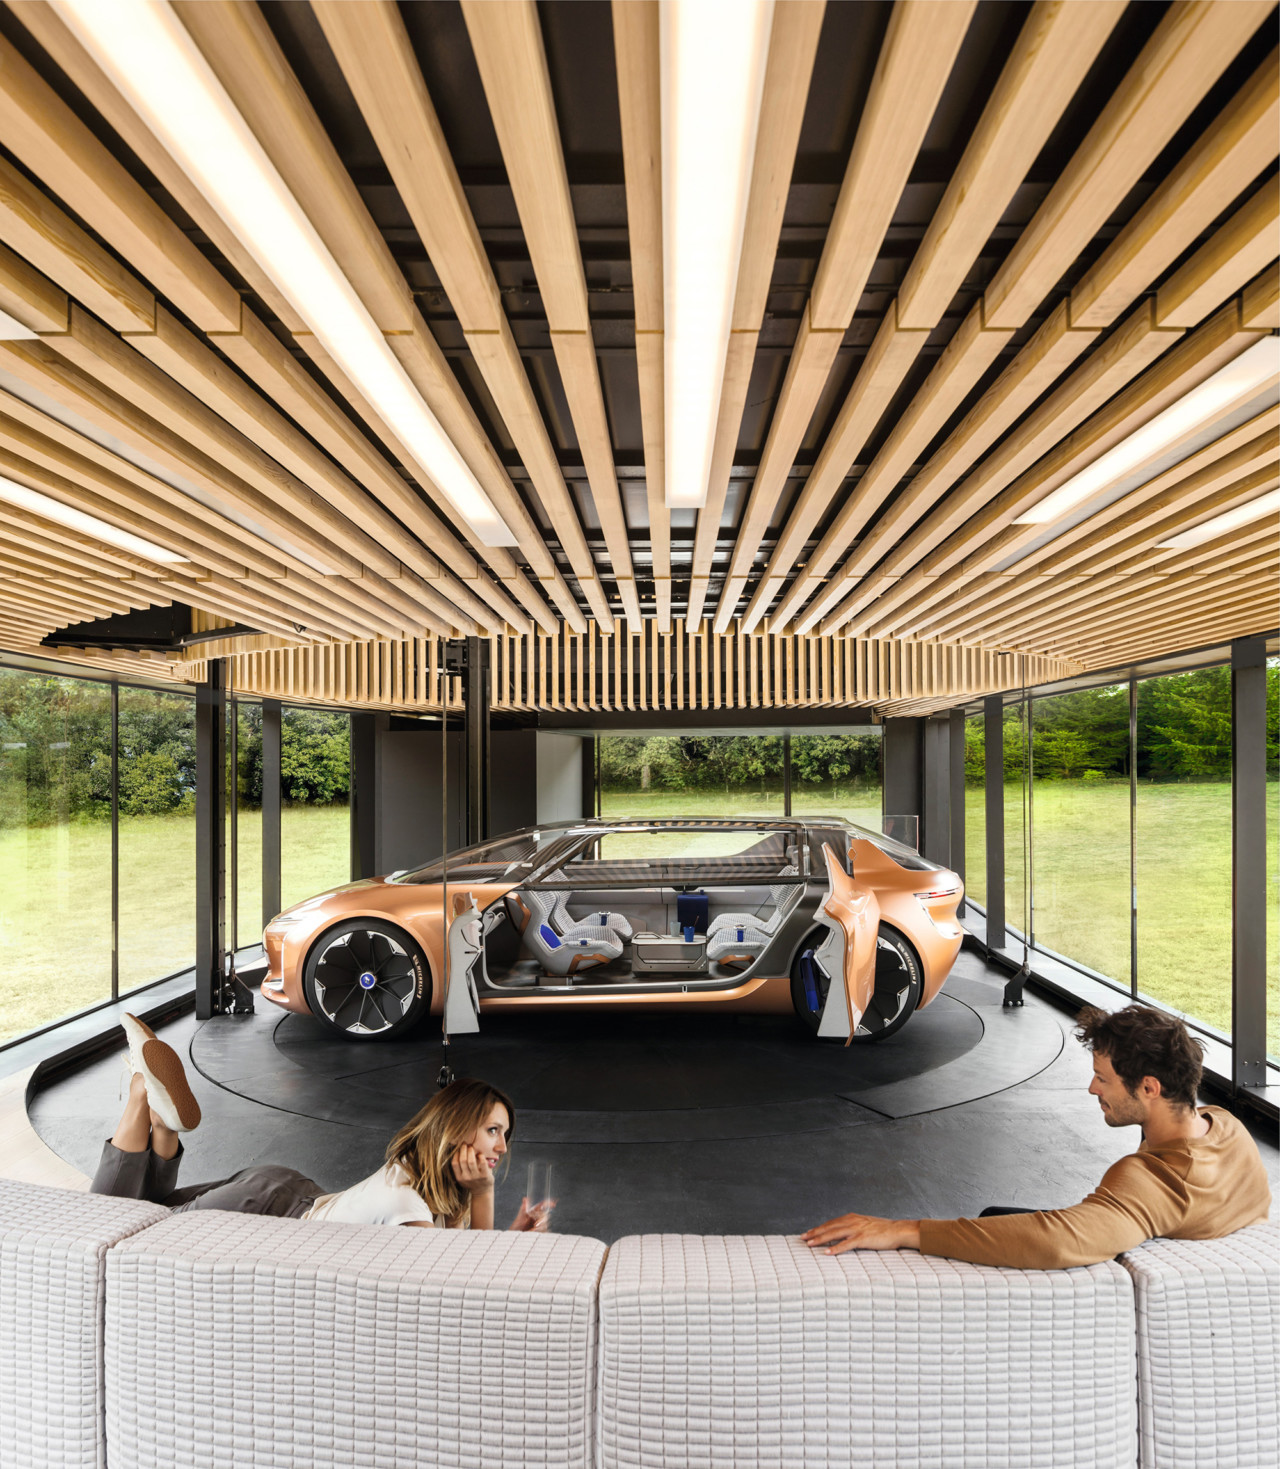 Renault and Philips Lighting’s Symbiosis of Auto and Architecture